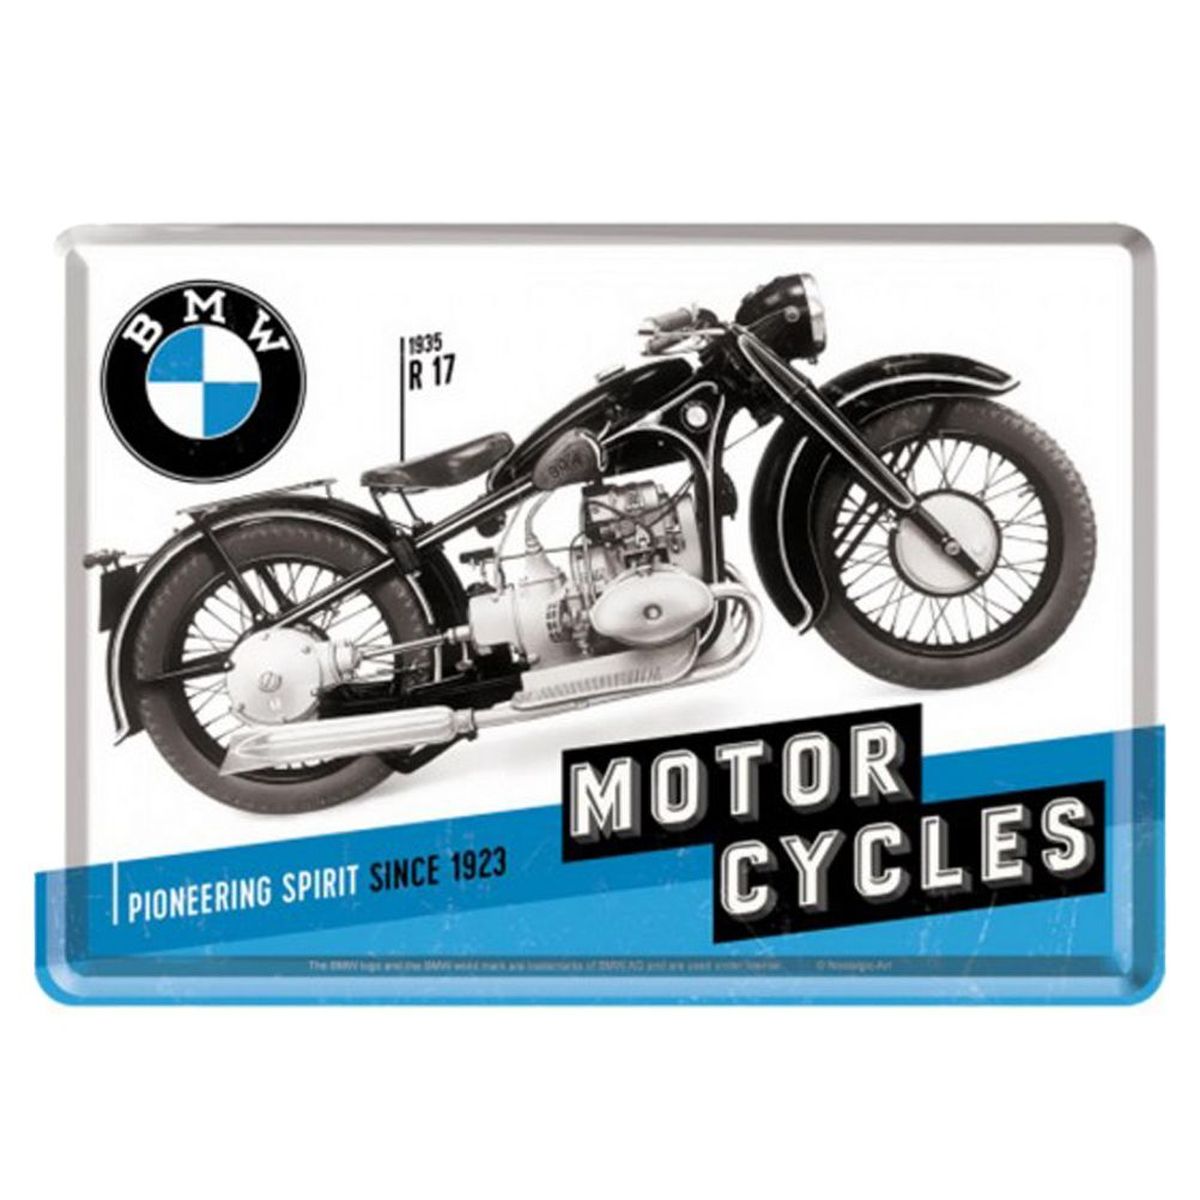 BMW Motor Cycles small metal plate